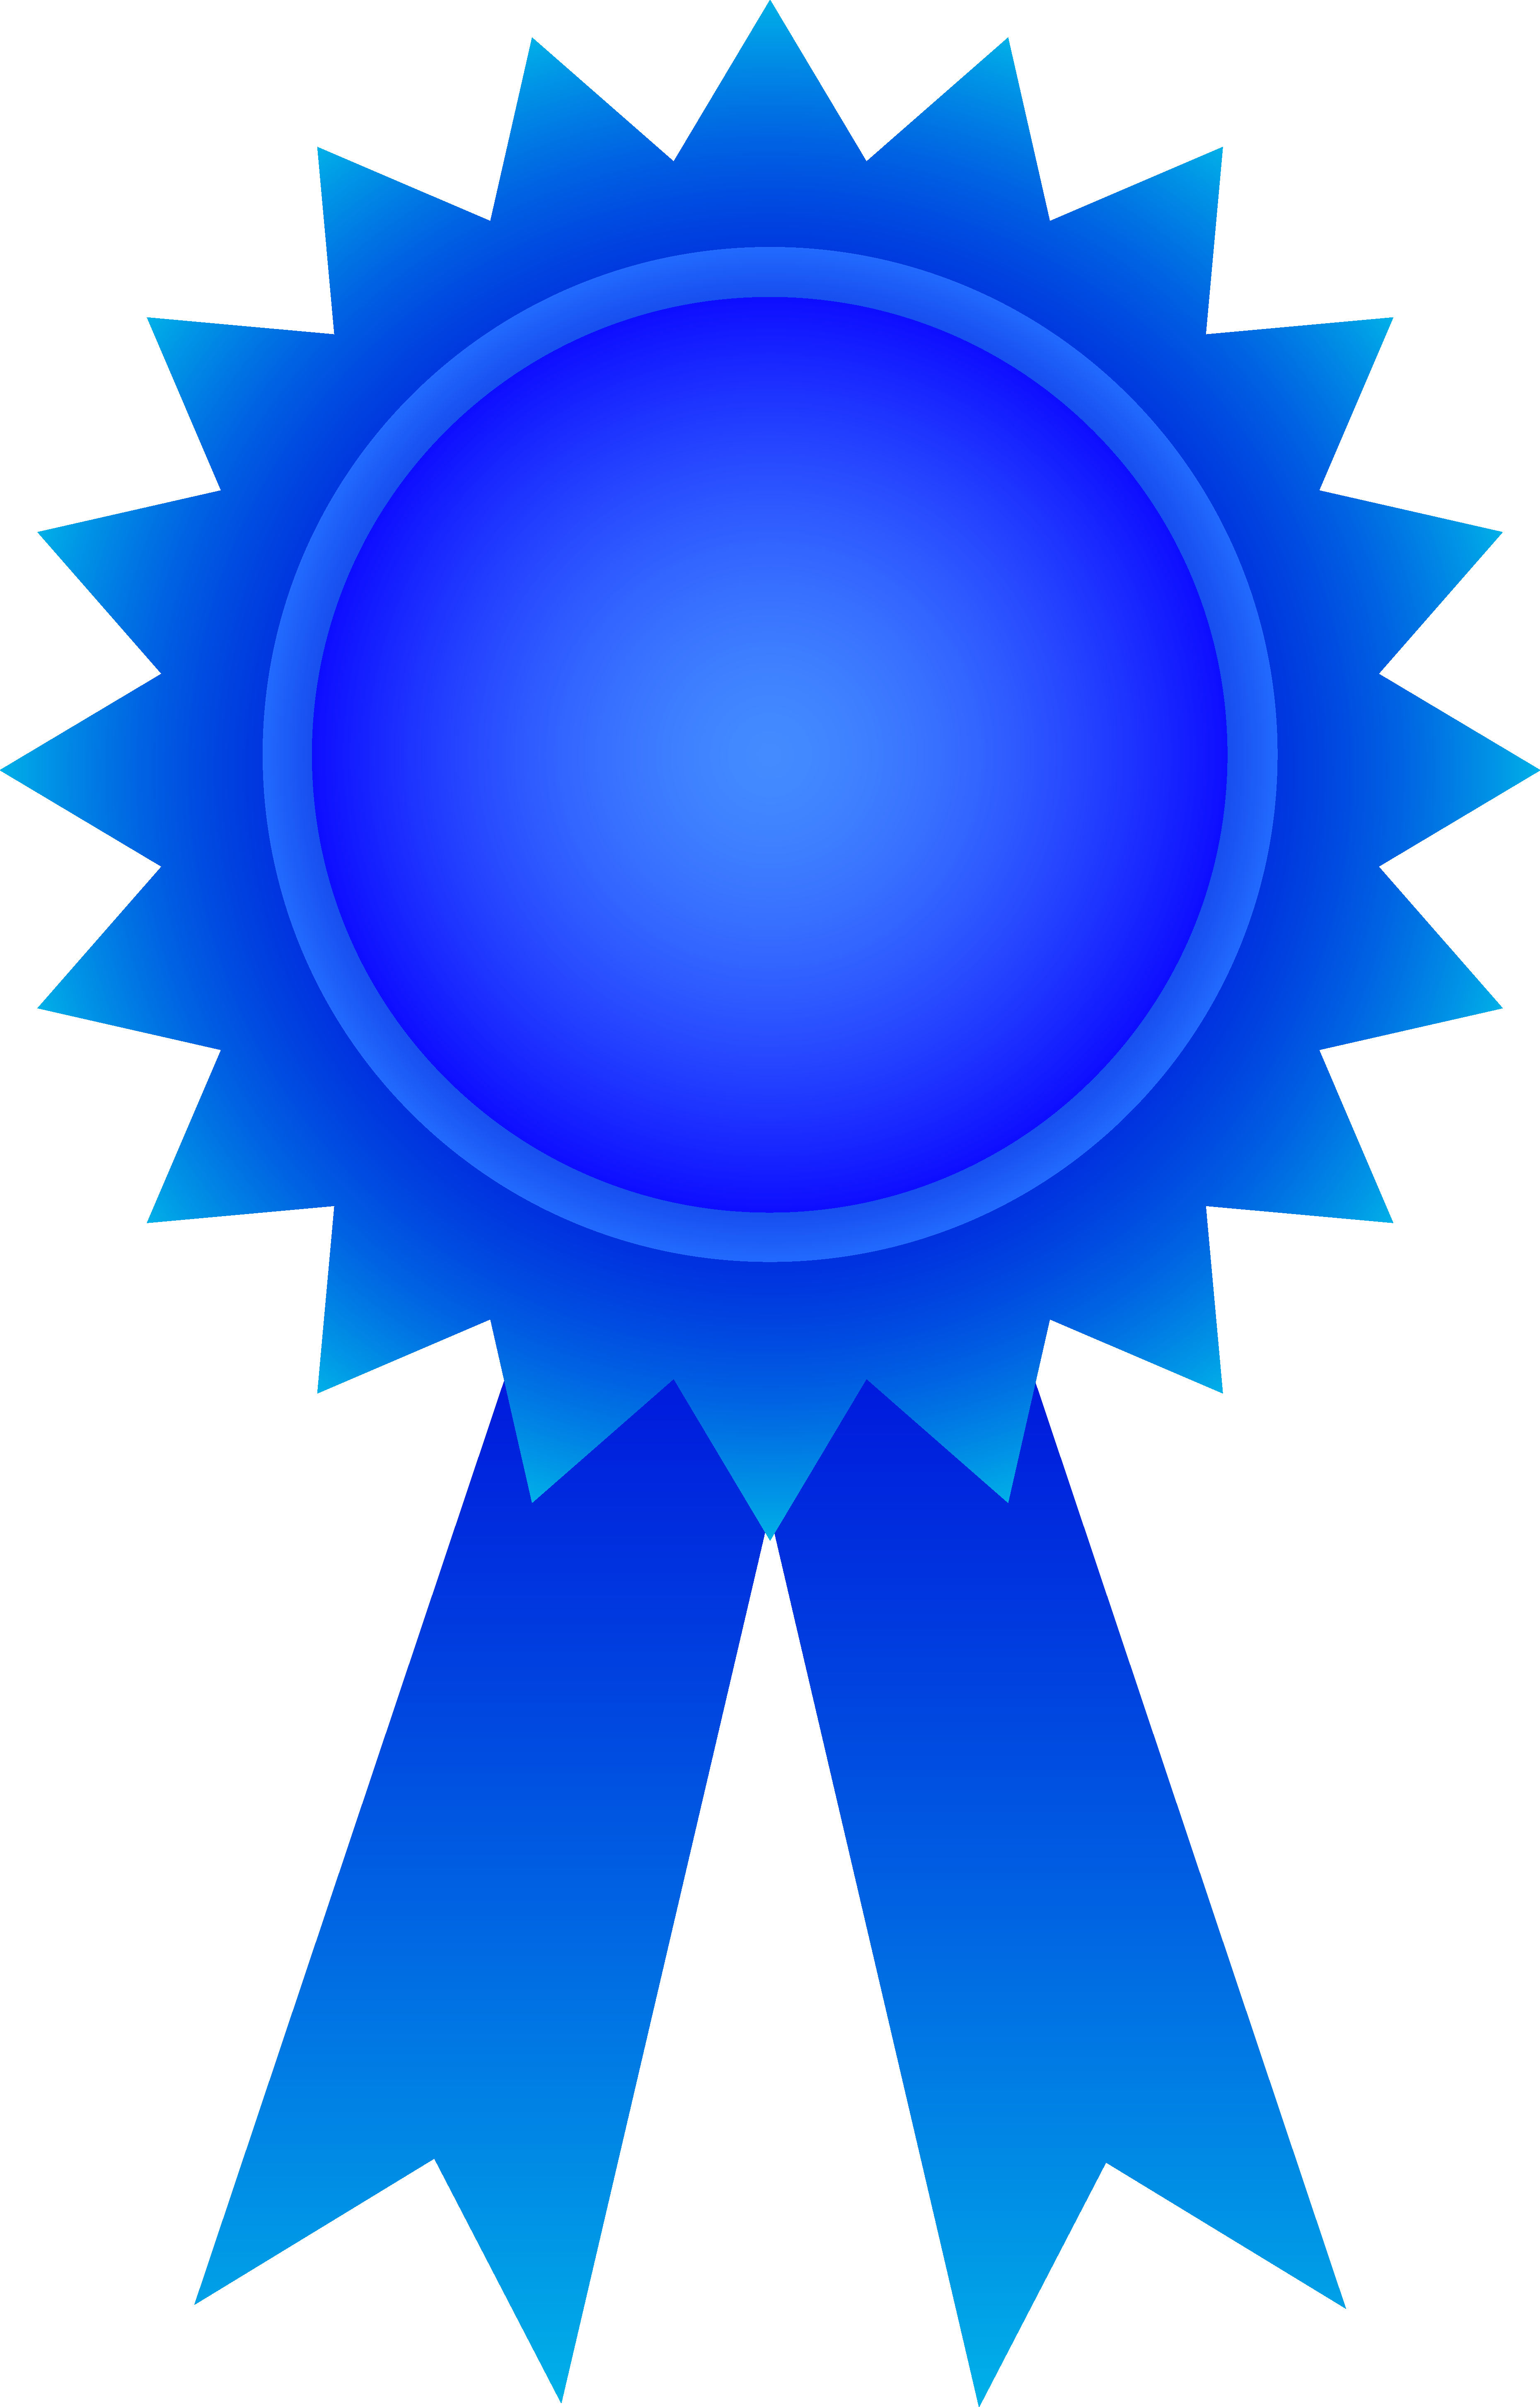 Free Academic Awards Cliparts, Download Free Clip Art, Free.